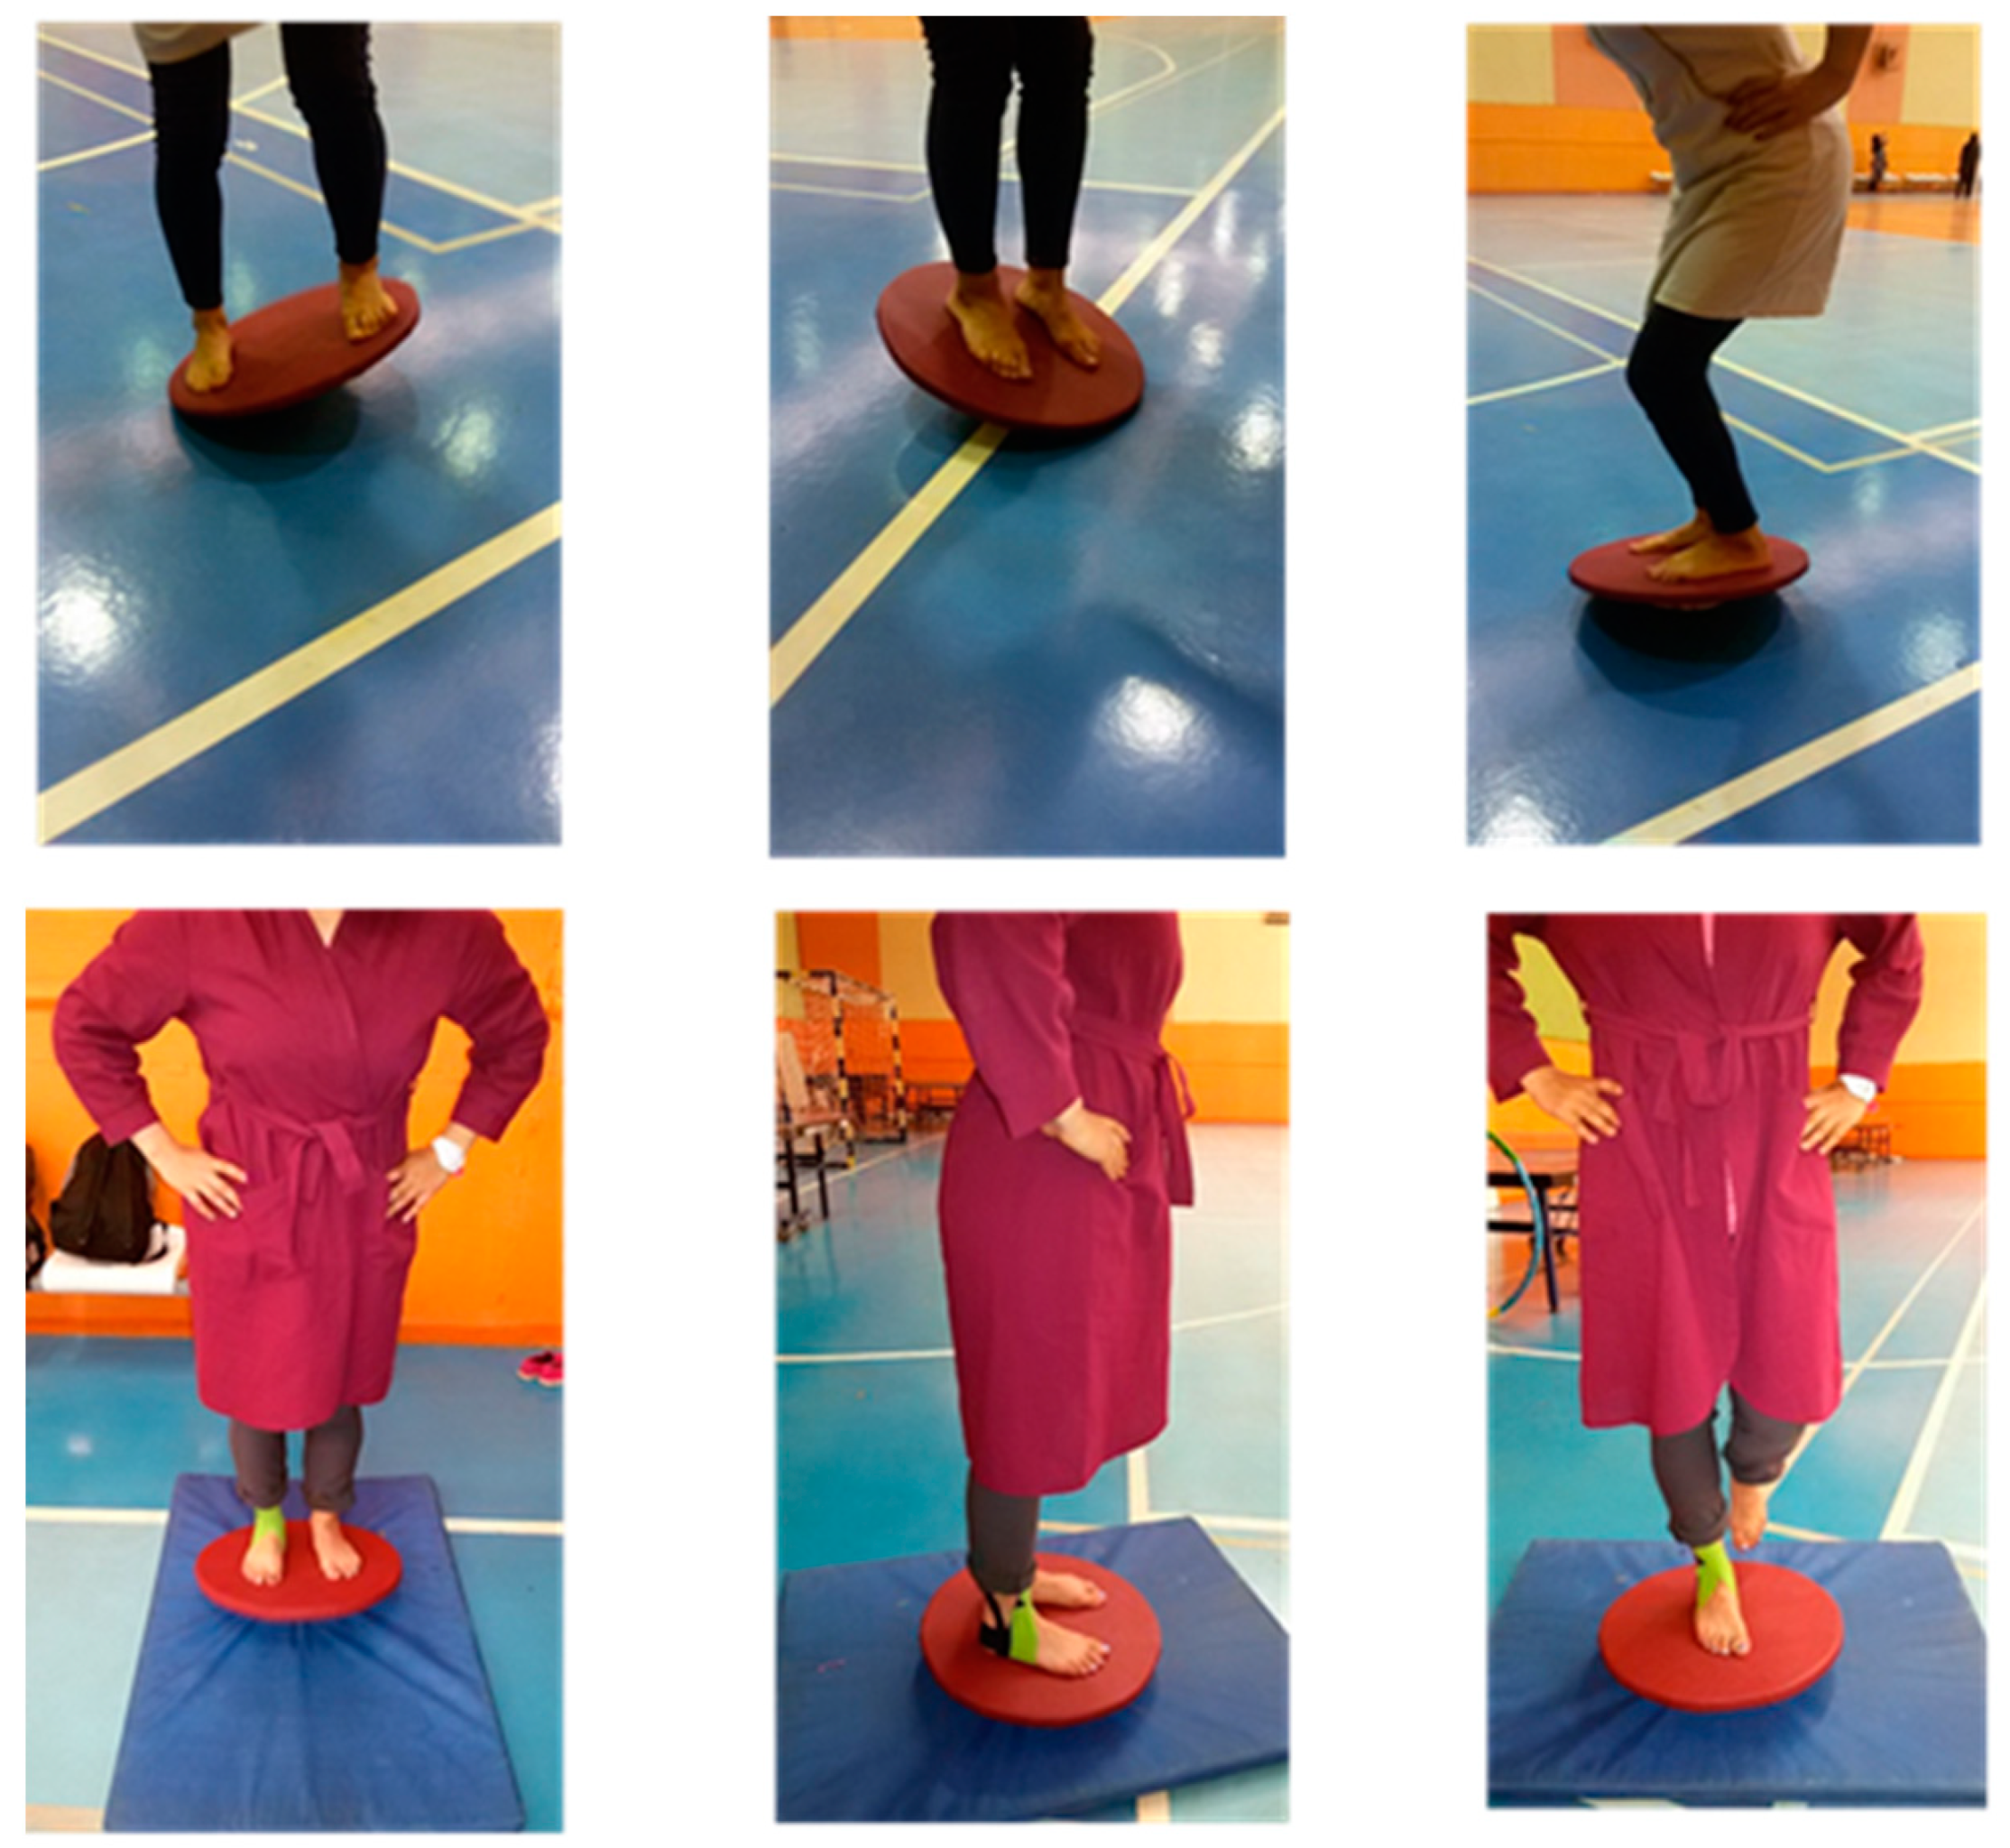 Ankle Stability Exercises 101: Balance Progressions - Penrith